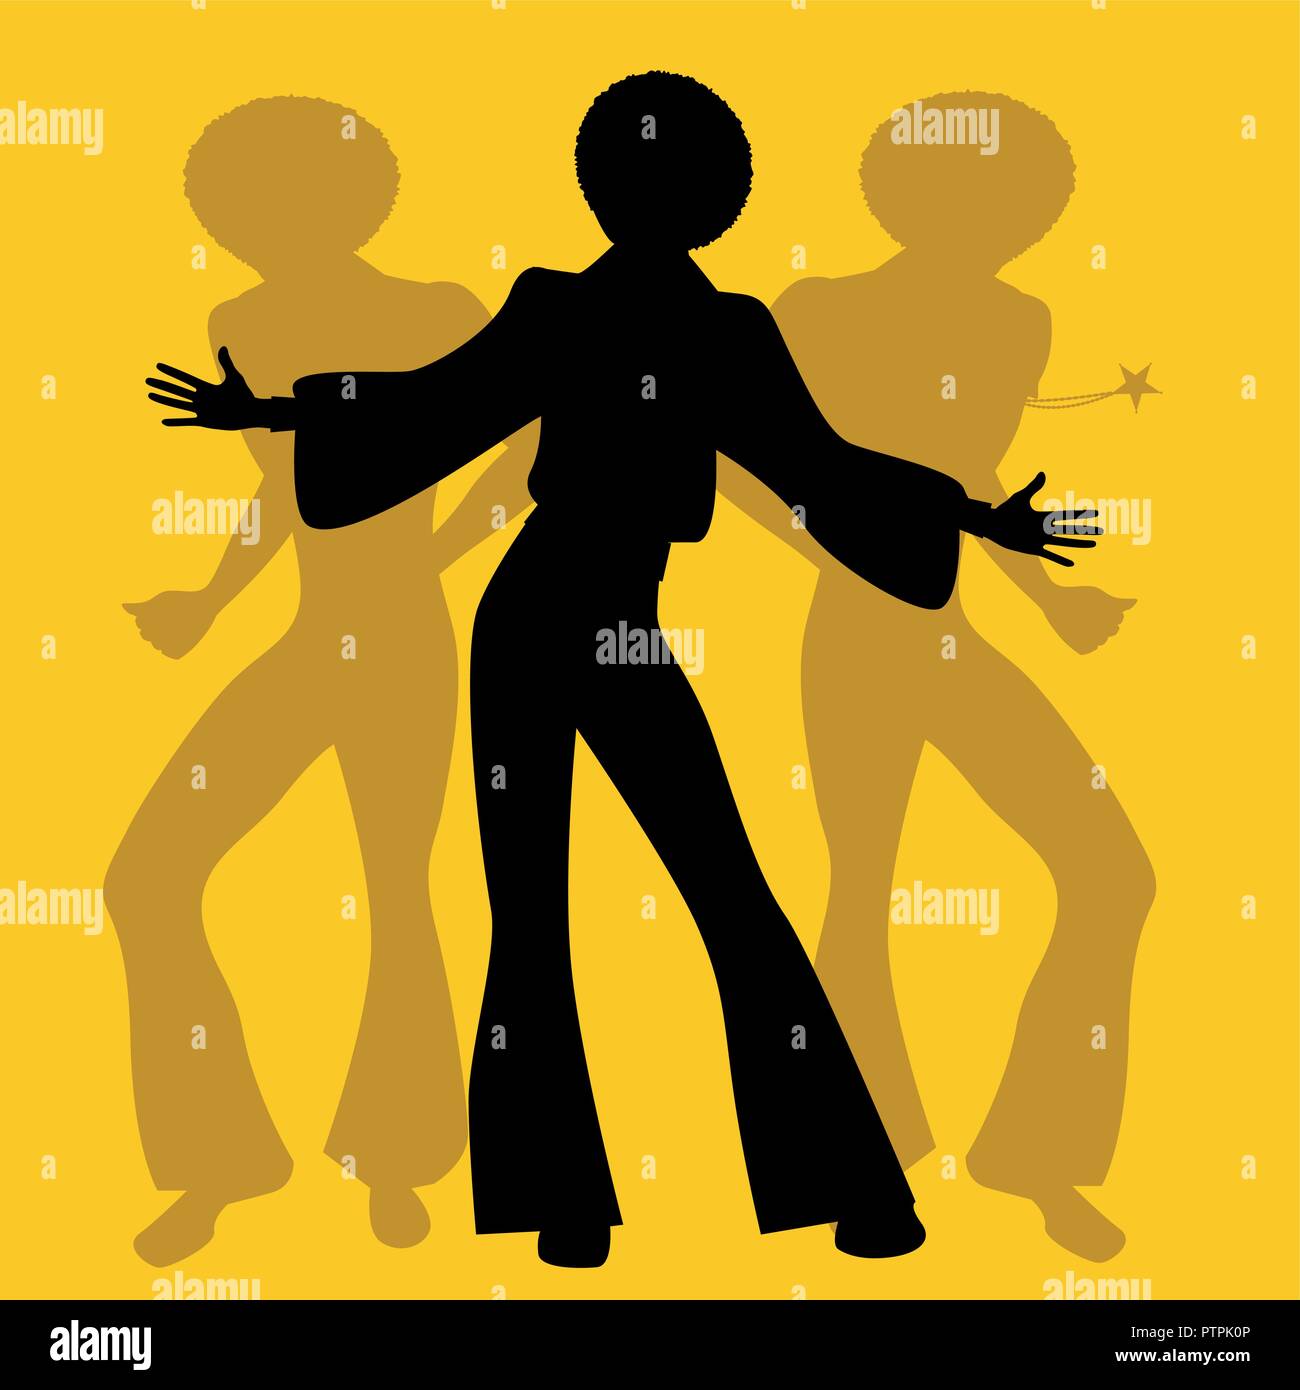 Silhouette of men dancing soul, funky or disco music. Retro Style. Stock Vector